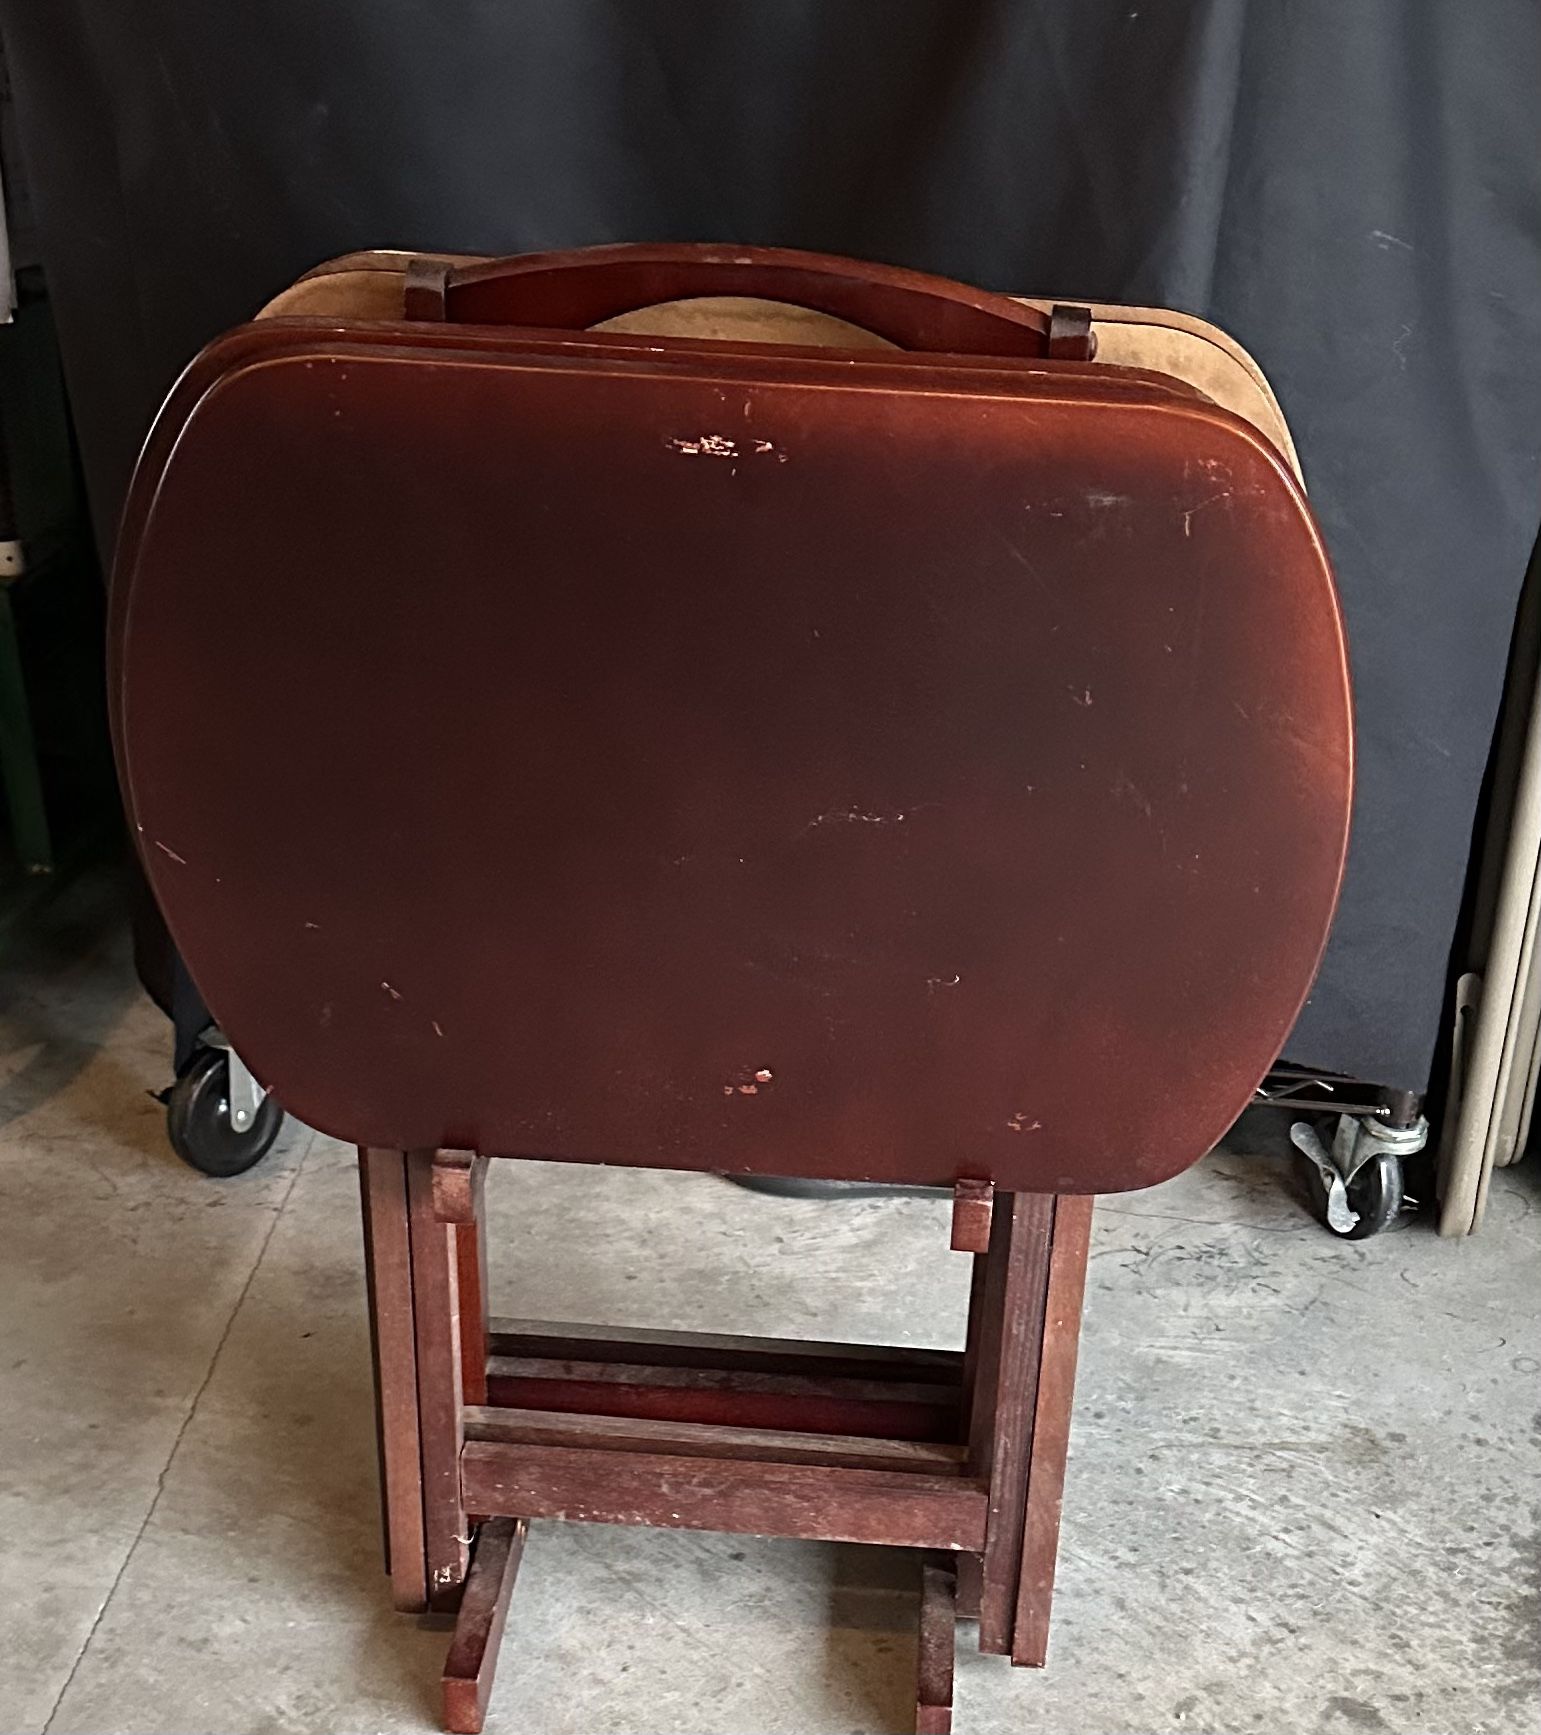 5 Piece Tray Tables ( Used )